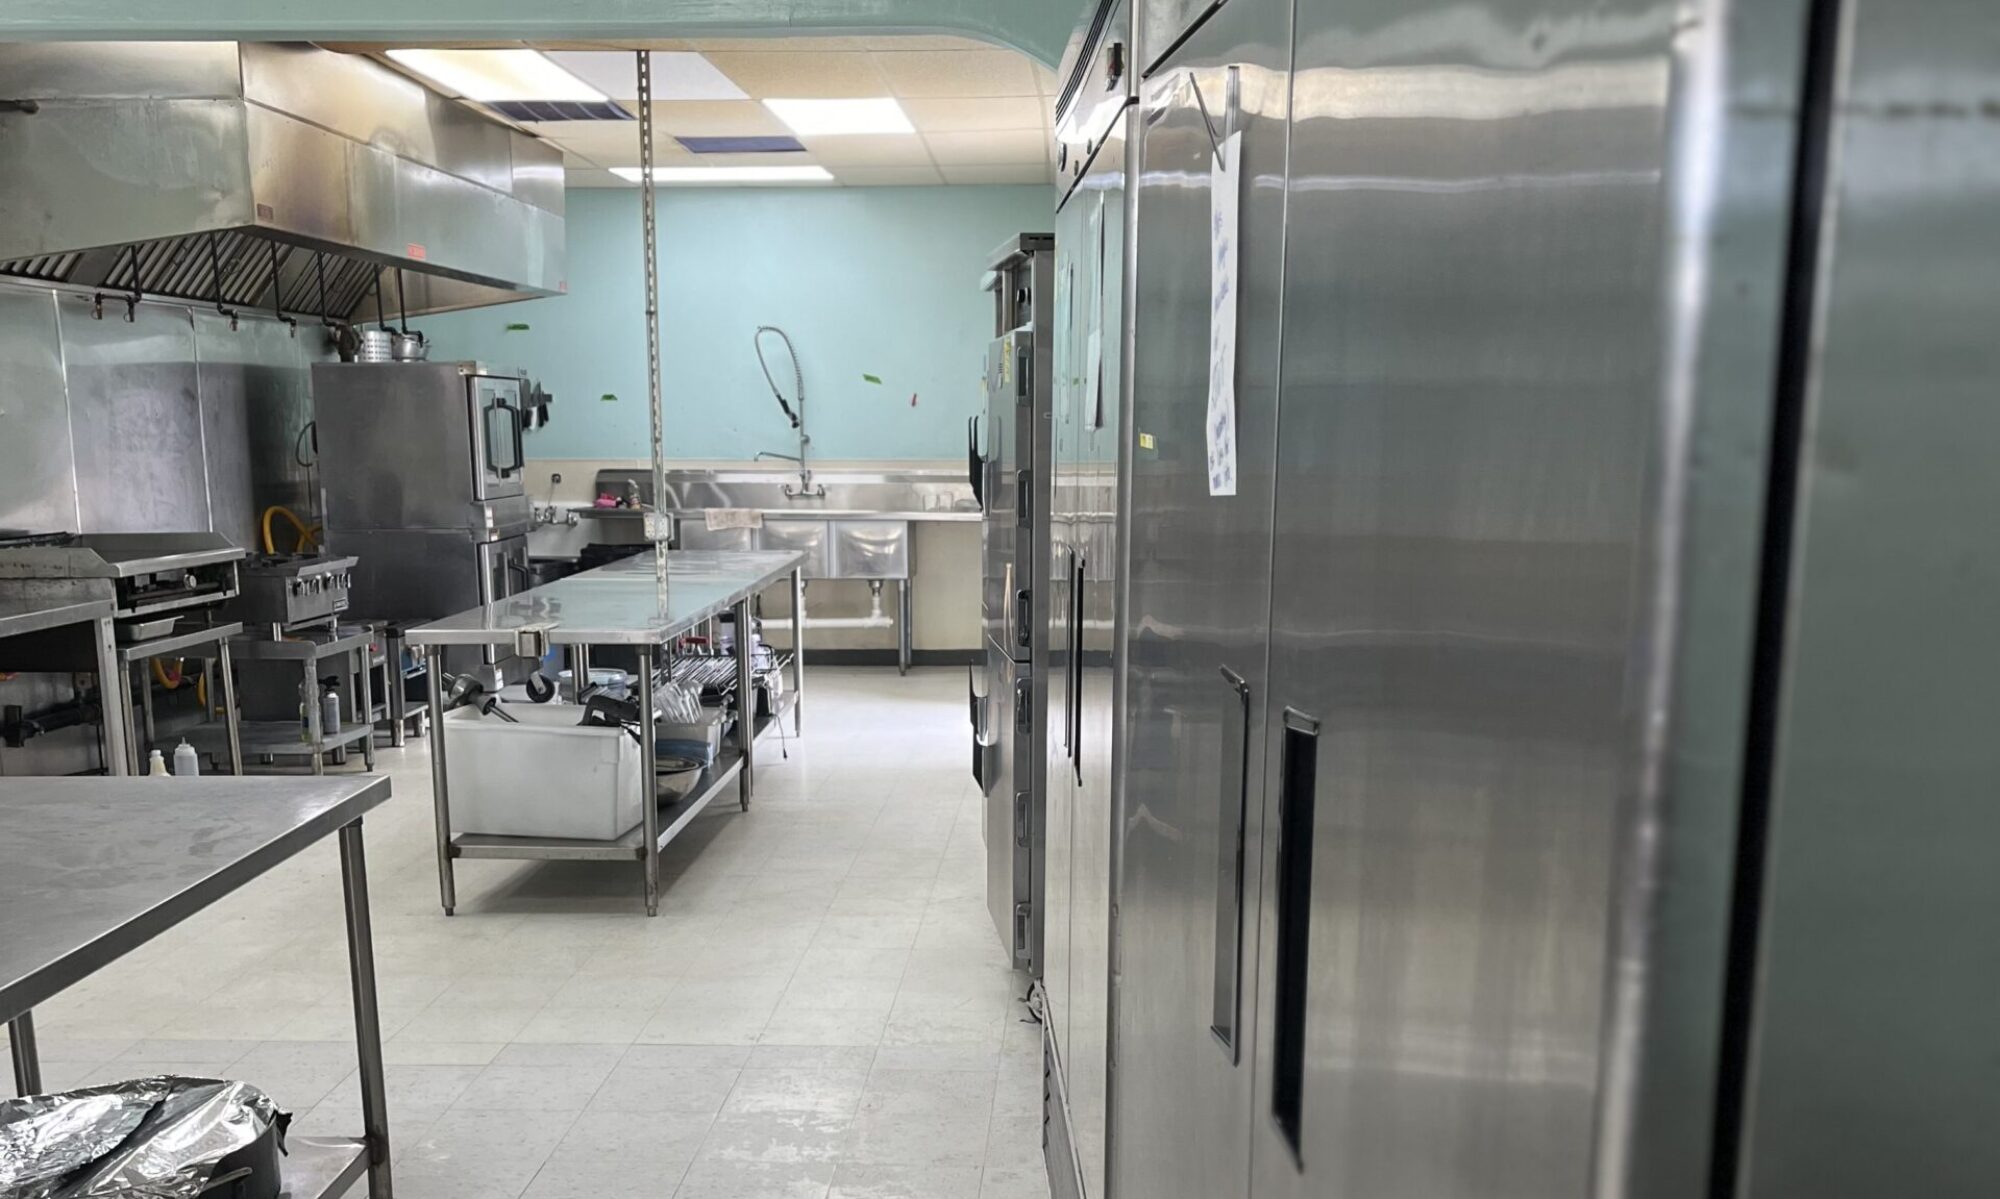 Shared Commercial Kitchen view long